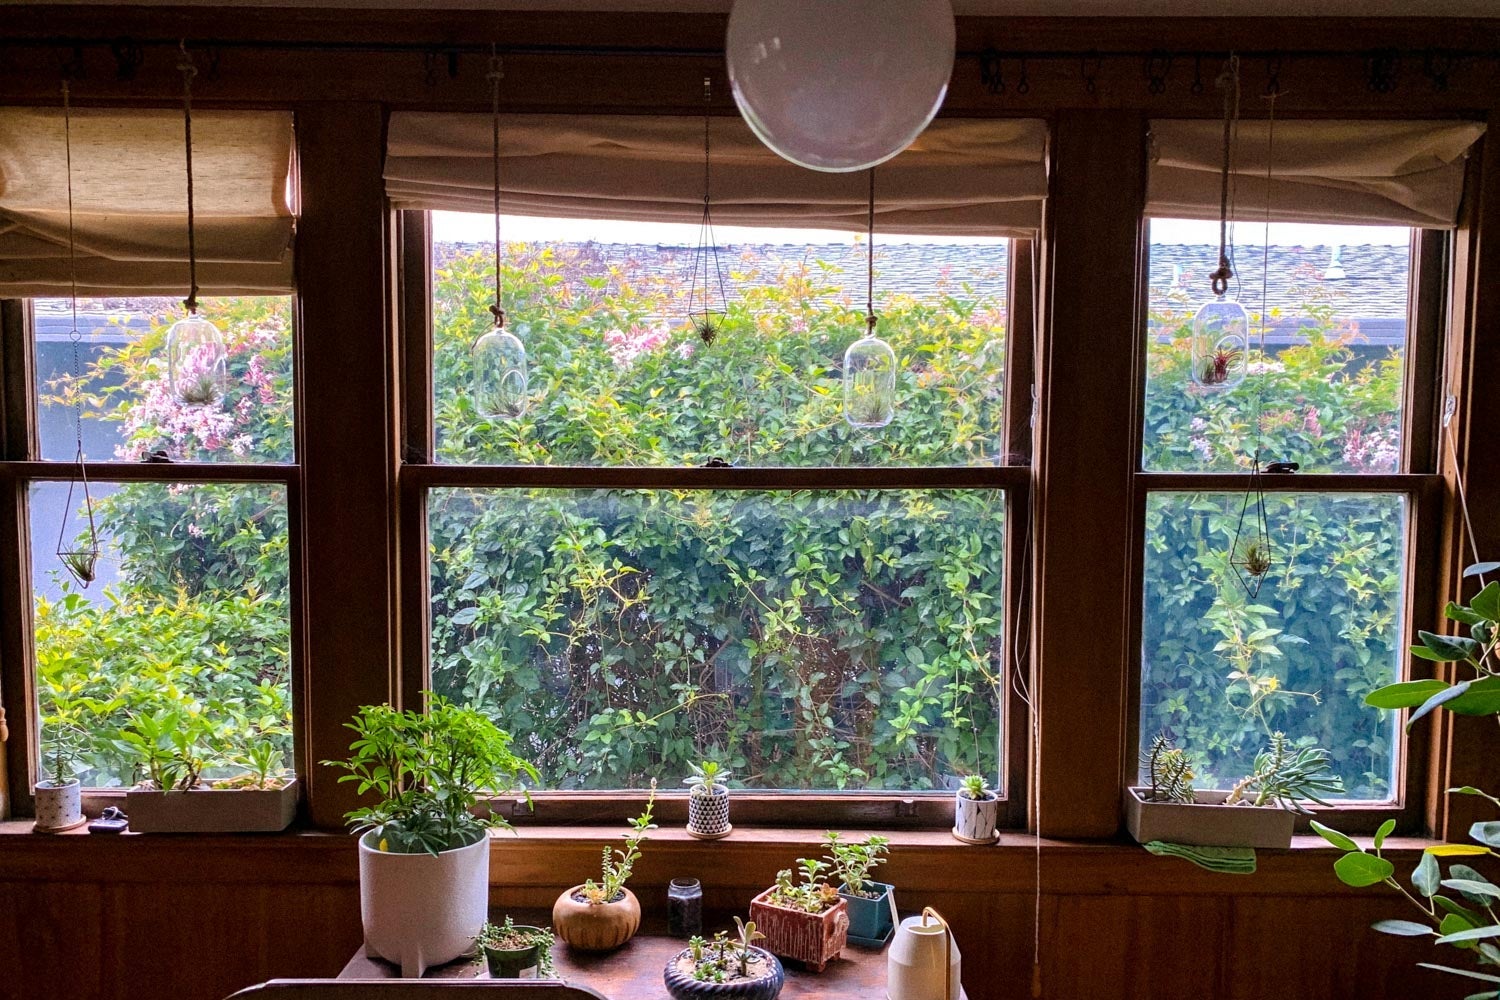 A window with many plants on the windowsill.